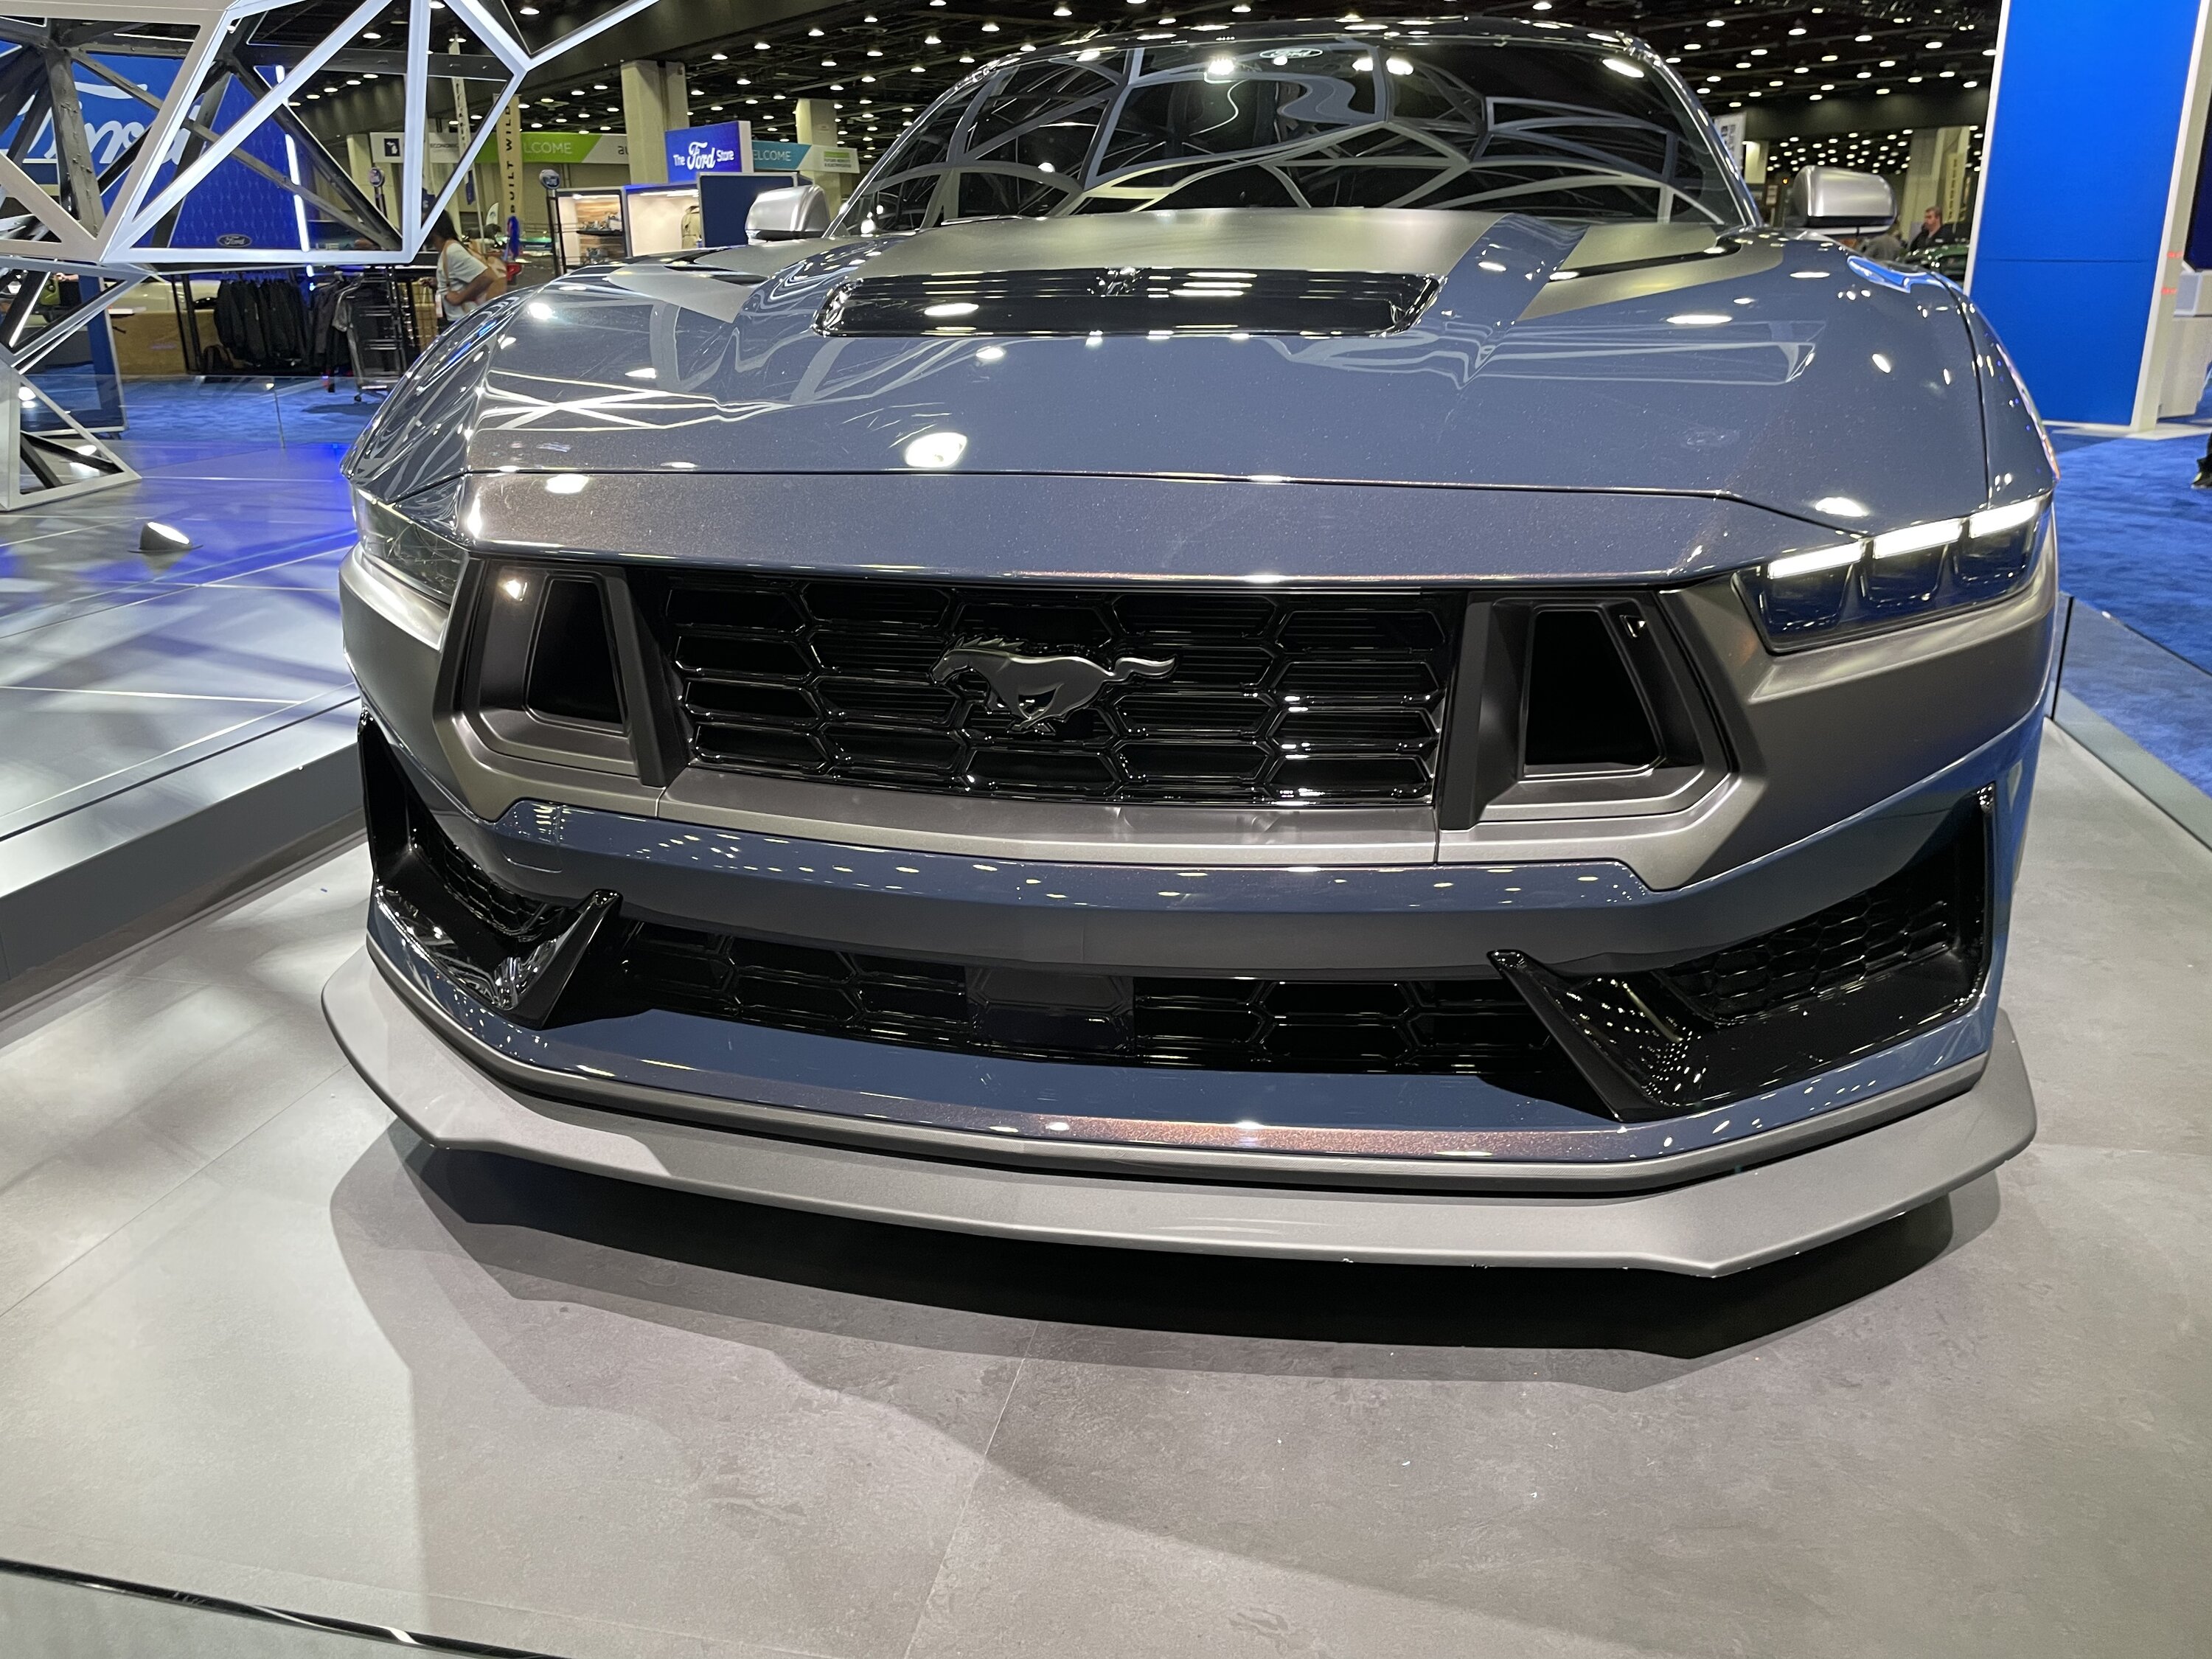 S650 Mustang S650 pics from reveal night and showfloor of 2022 Detroit Auto Show 0361fa2d-2a80-4b65-a3d8-e59b6121a457-jpeg-